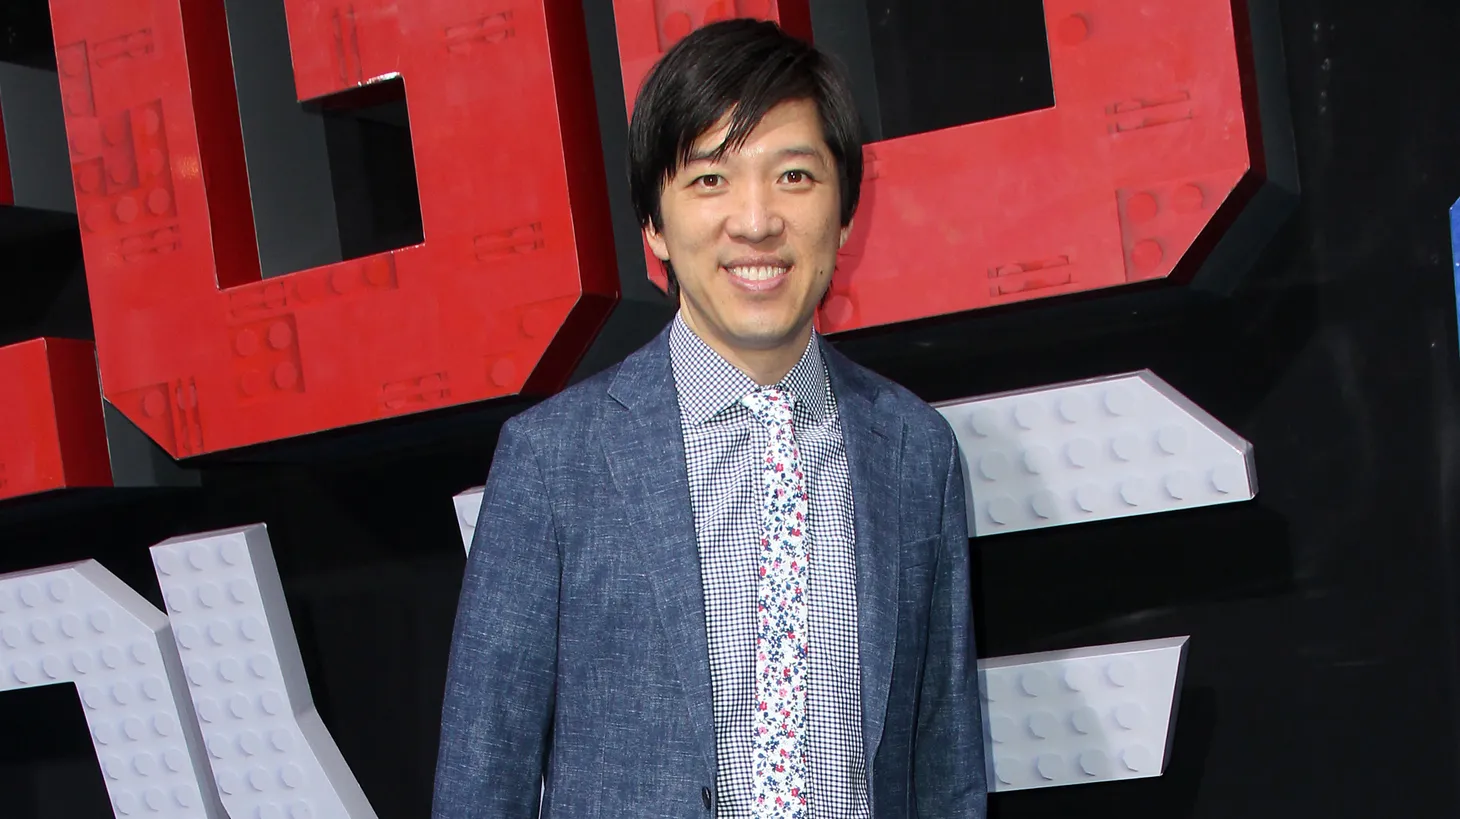 Producer Dan Lin attends “The Lego Movie 2: The Second Part” premiere at the Regency Village Theater in Los Angeles, on February 2, 2019.